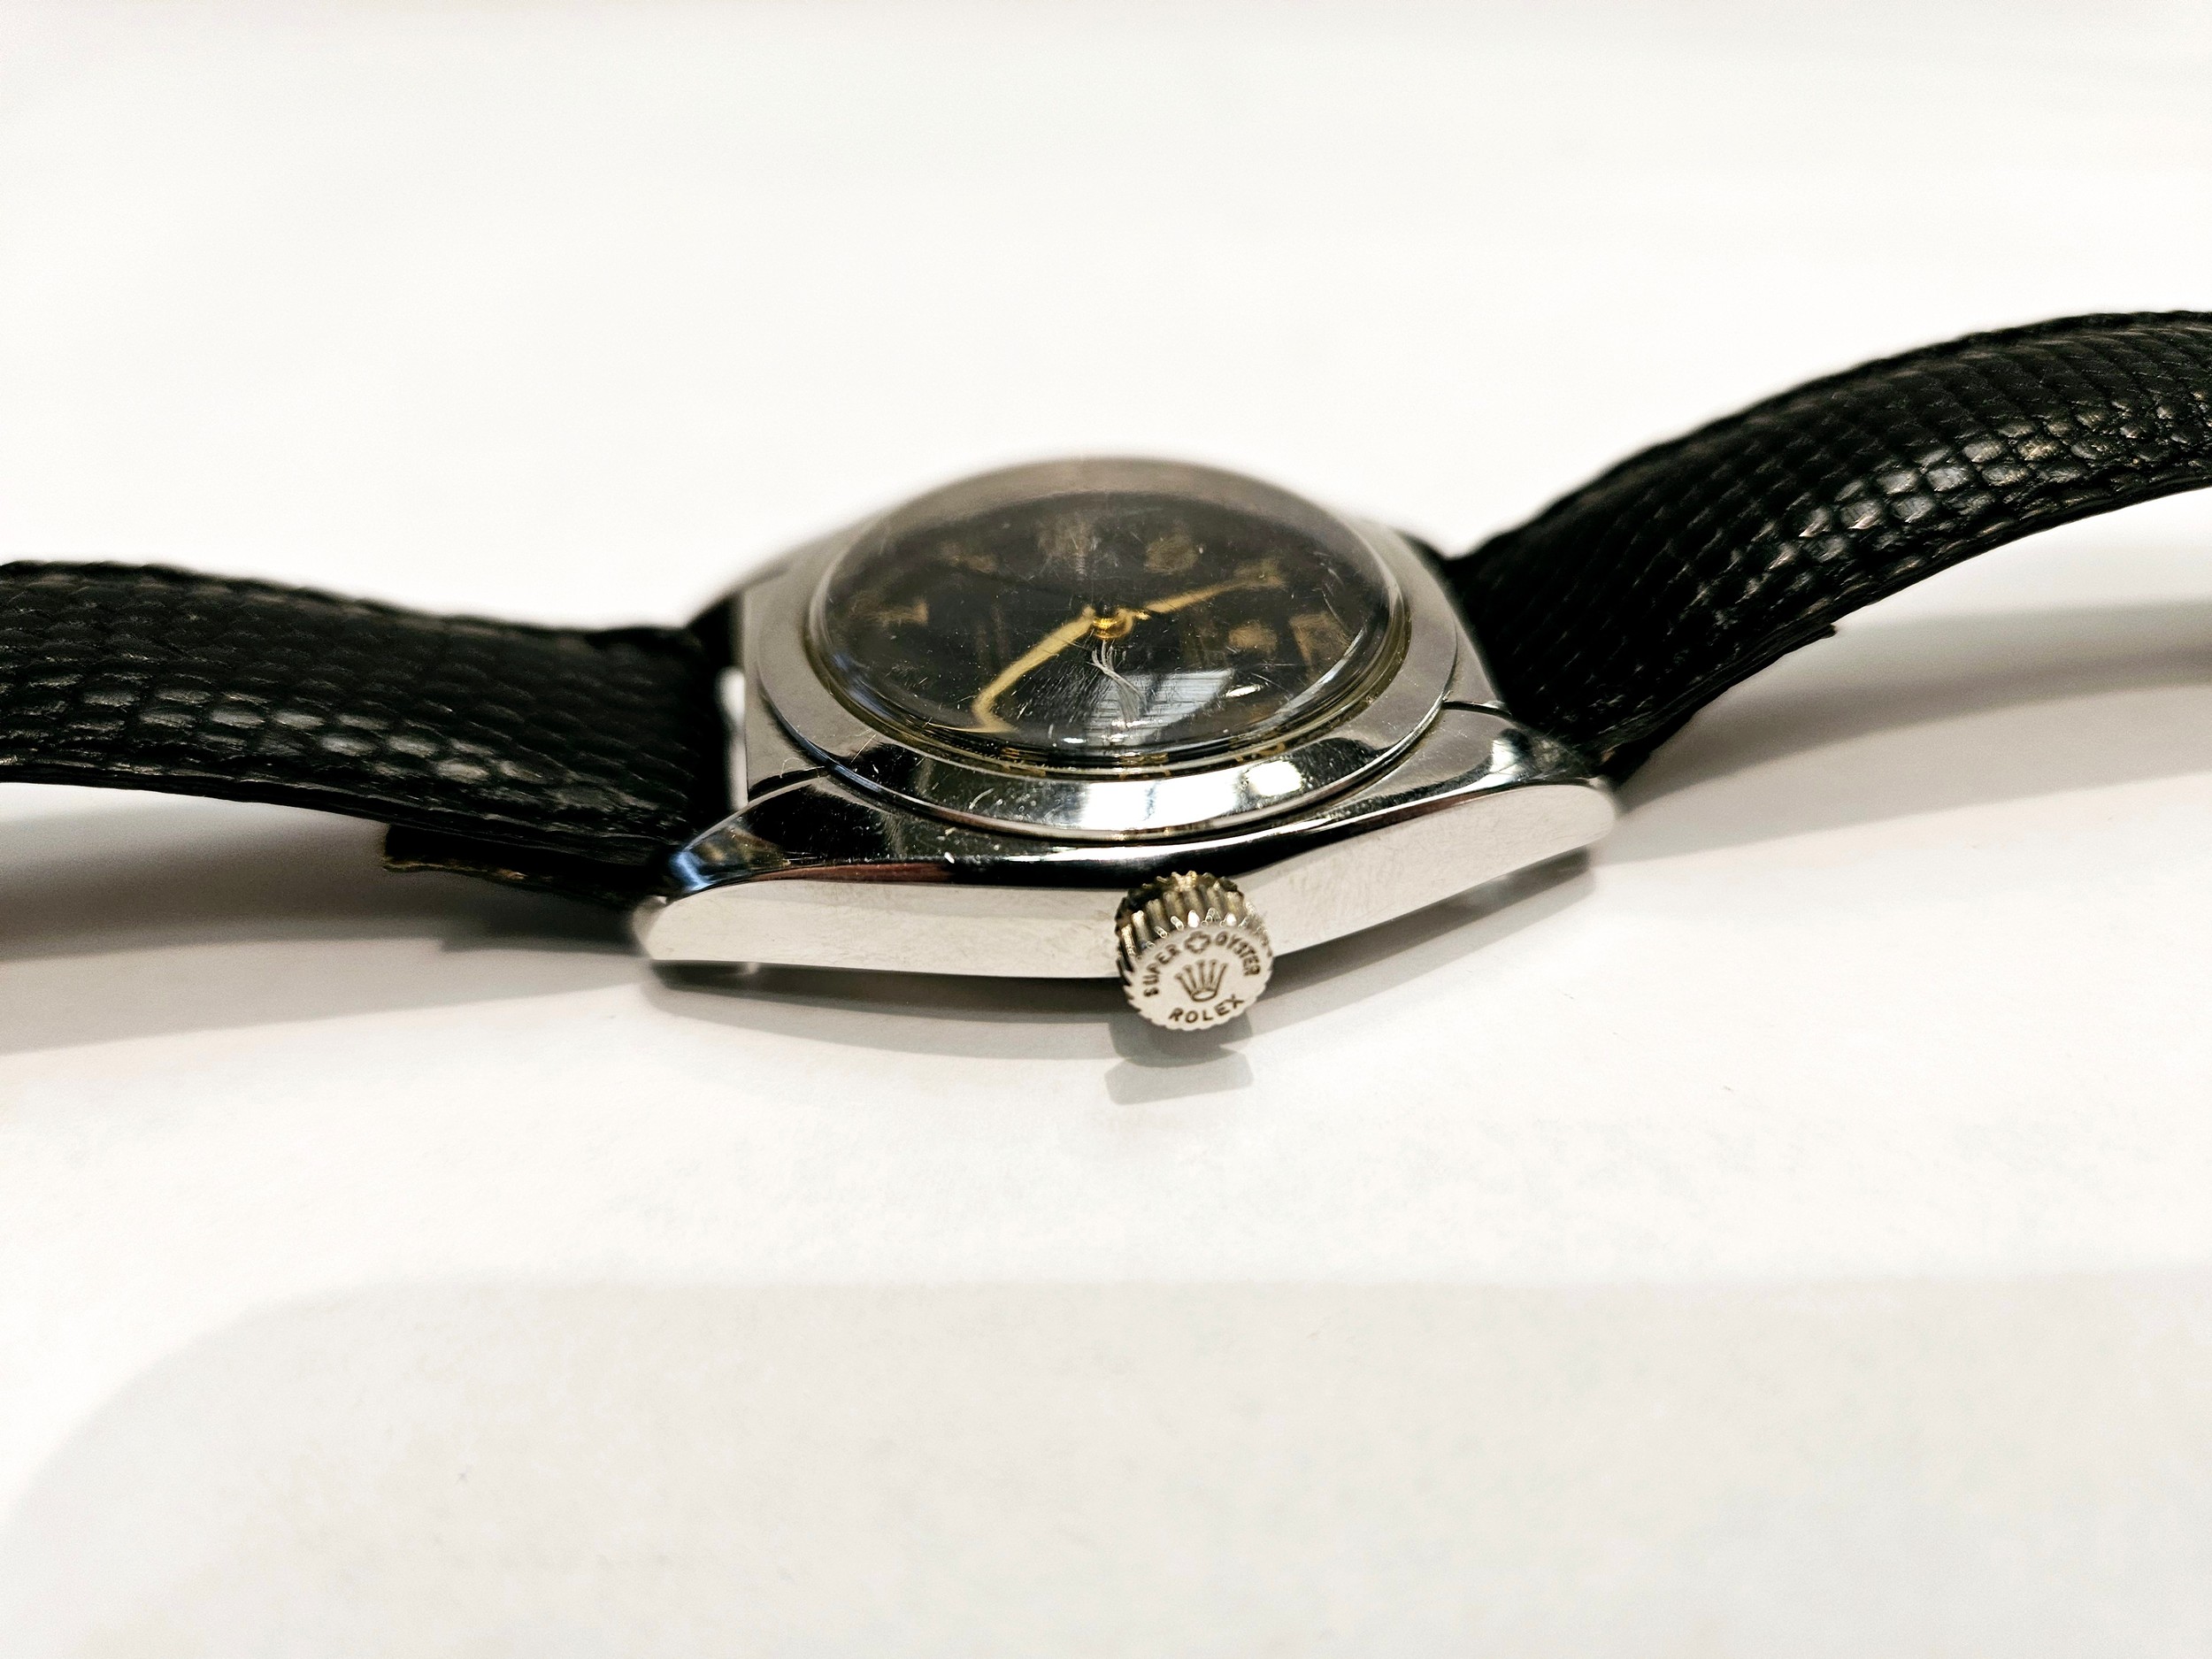 Circa 1950s Rolex Oyster Perpetual with black dial and bubble back, No. 5015, 545383 on leather - Image 7 of 7